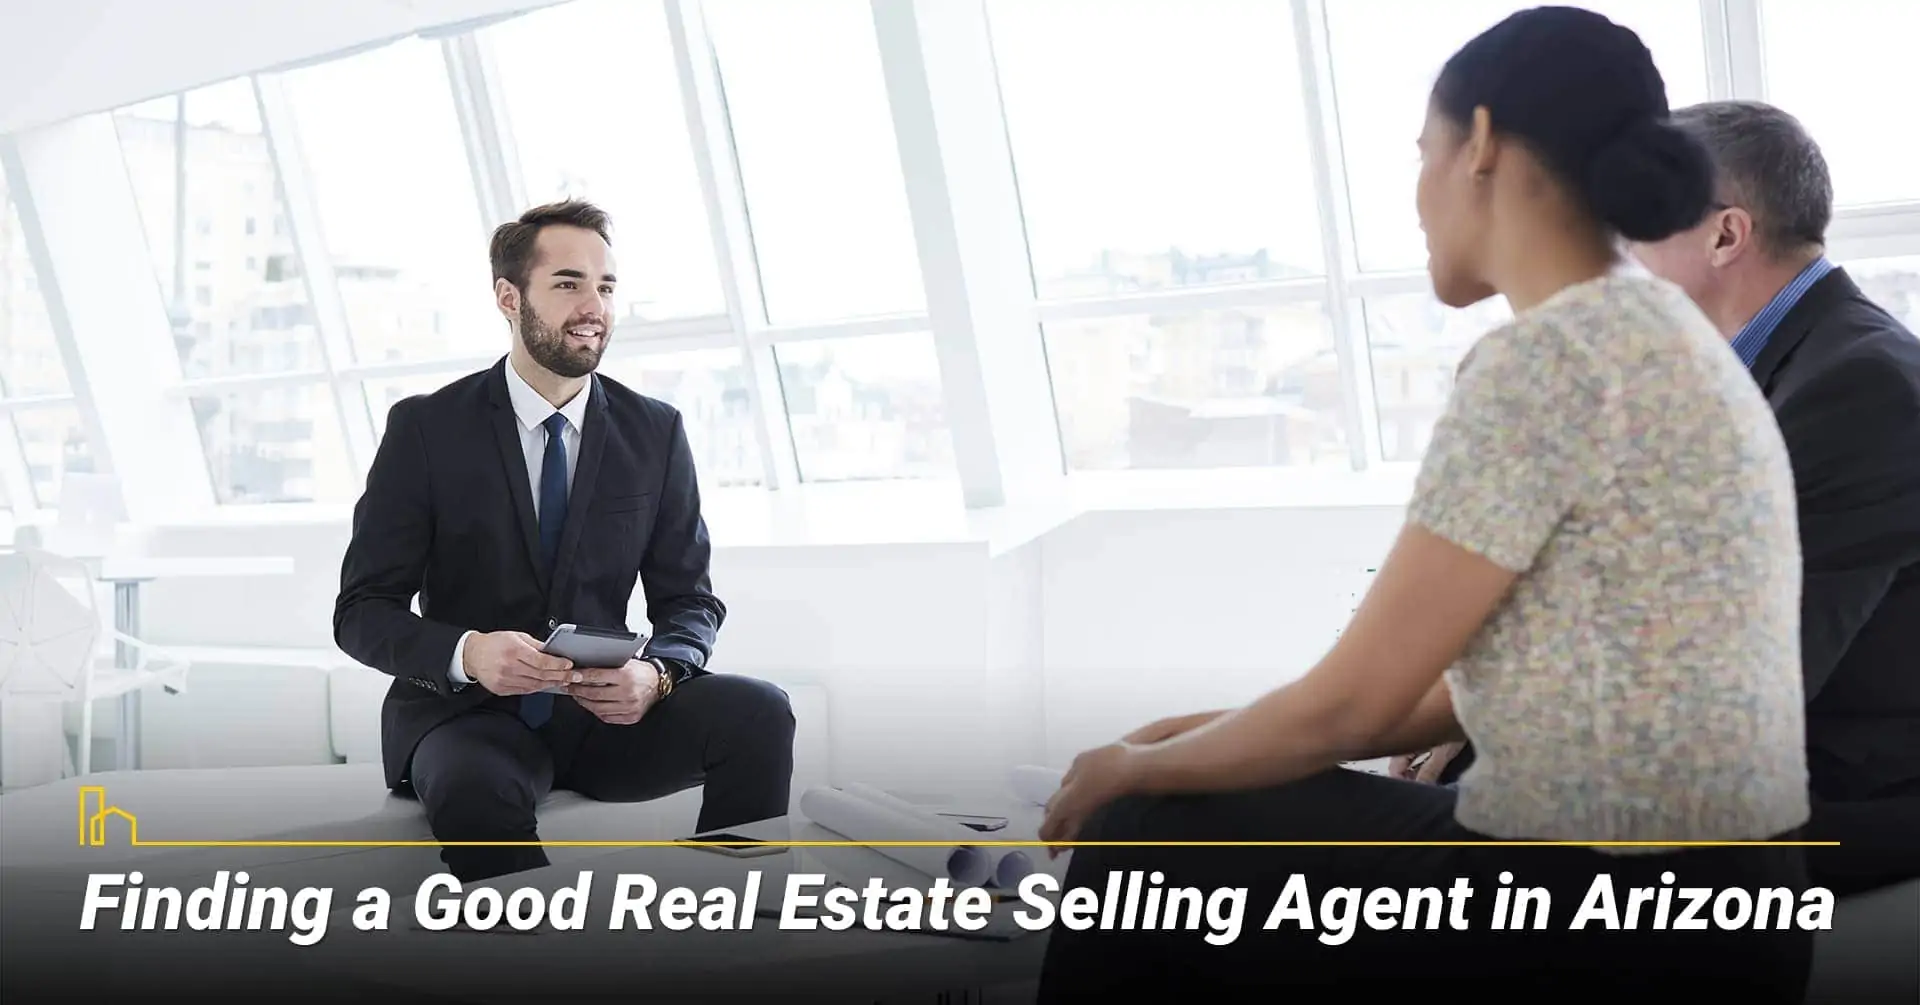 Finding a Good Real Estate Selling Agent in Arizona, work with a local real estate agent